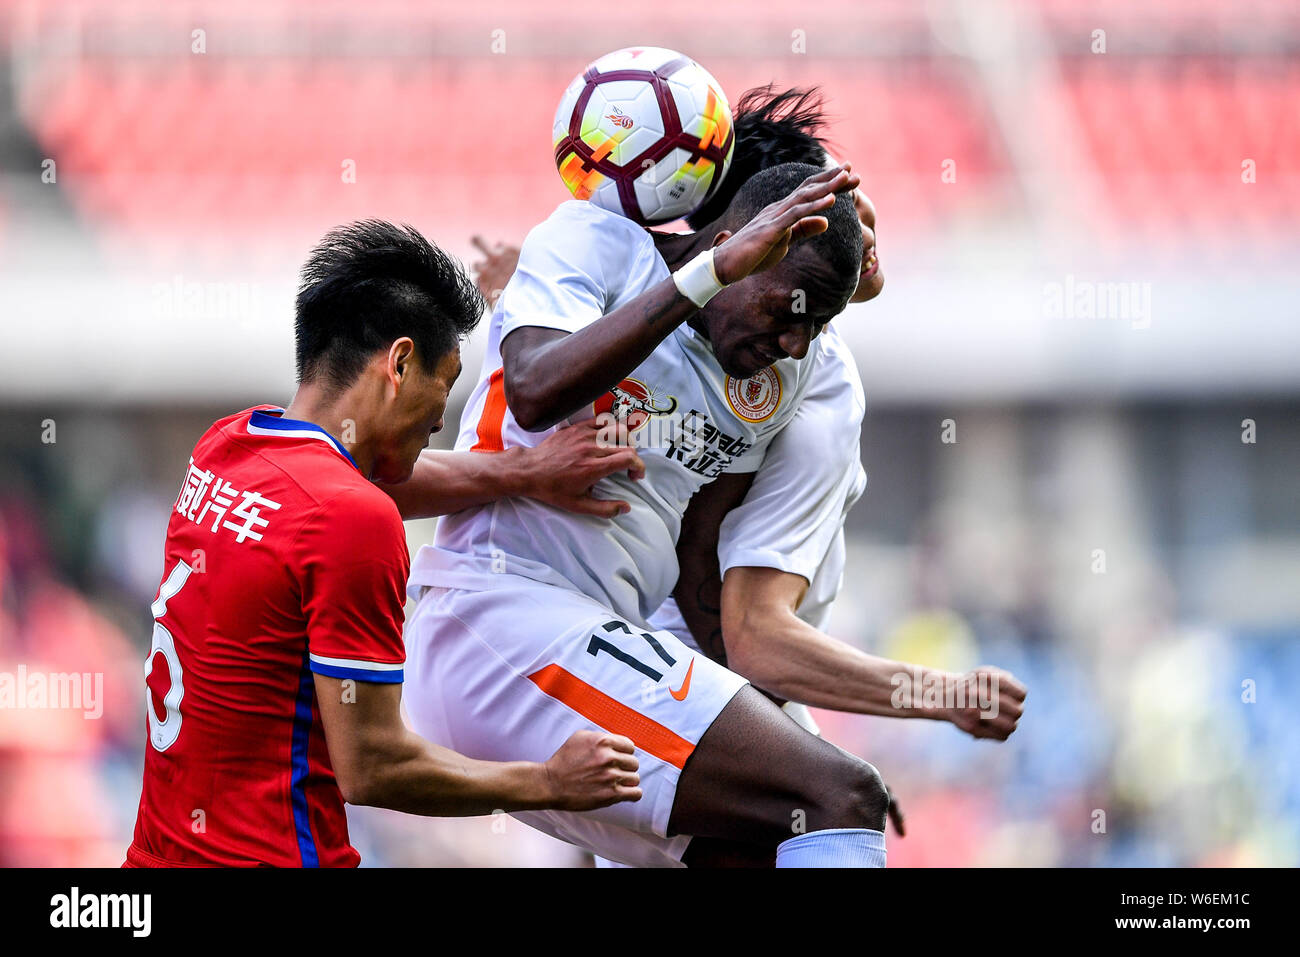 Ecuadorian football player Jaime Ayovi, top, of Beijing Renhe heads the ball to make a pass against a player of Chongqing SWM in their first round mat Stock Photo